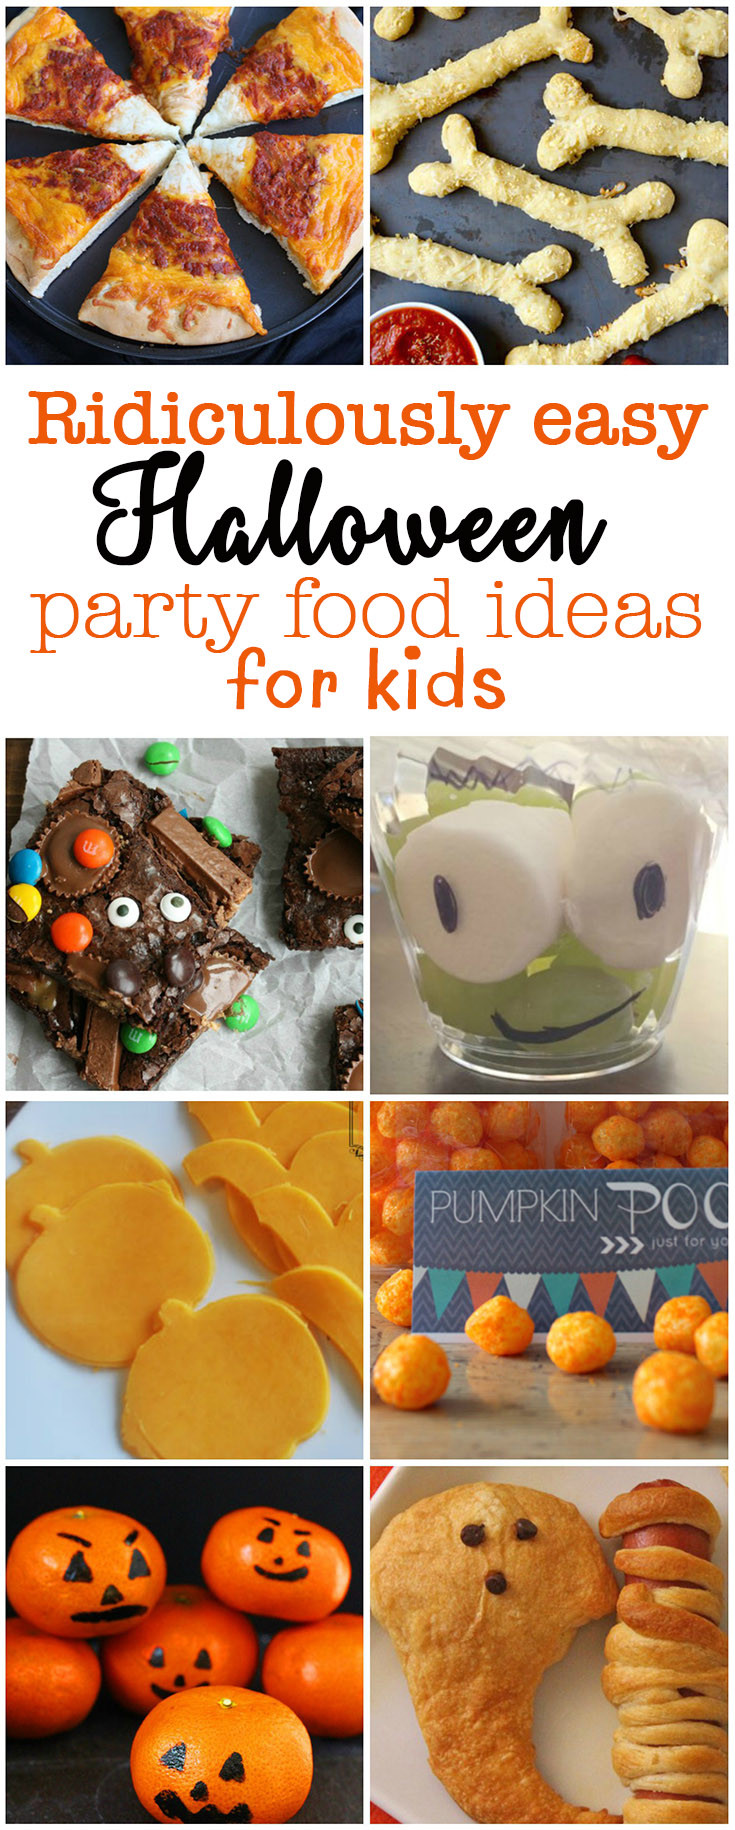 Halloween Party Food Ideas For Kids
 Ridiculously easy Halloween party food for kids Eat